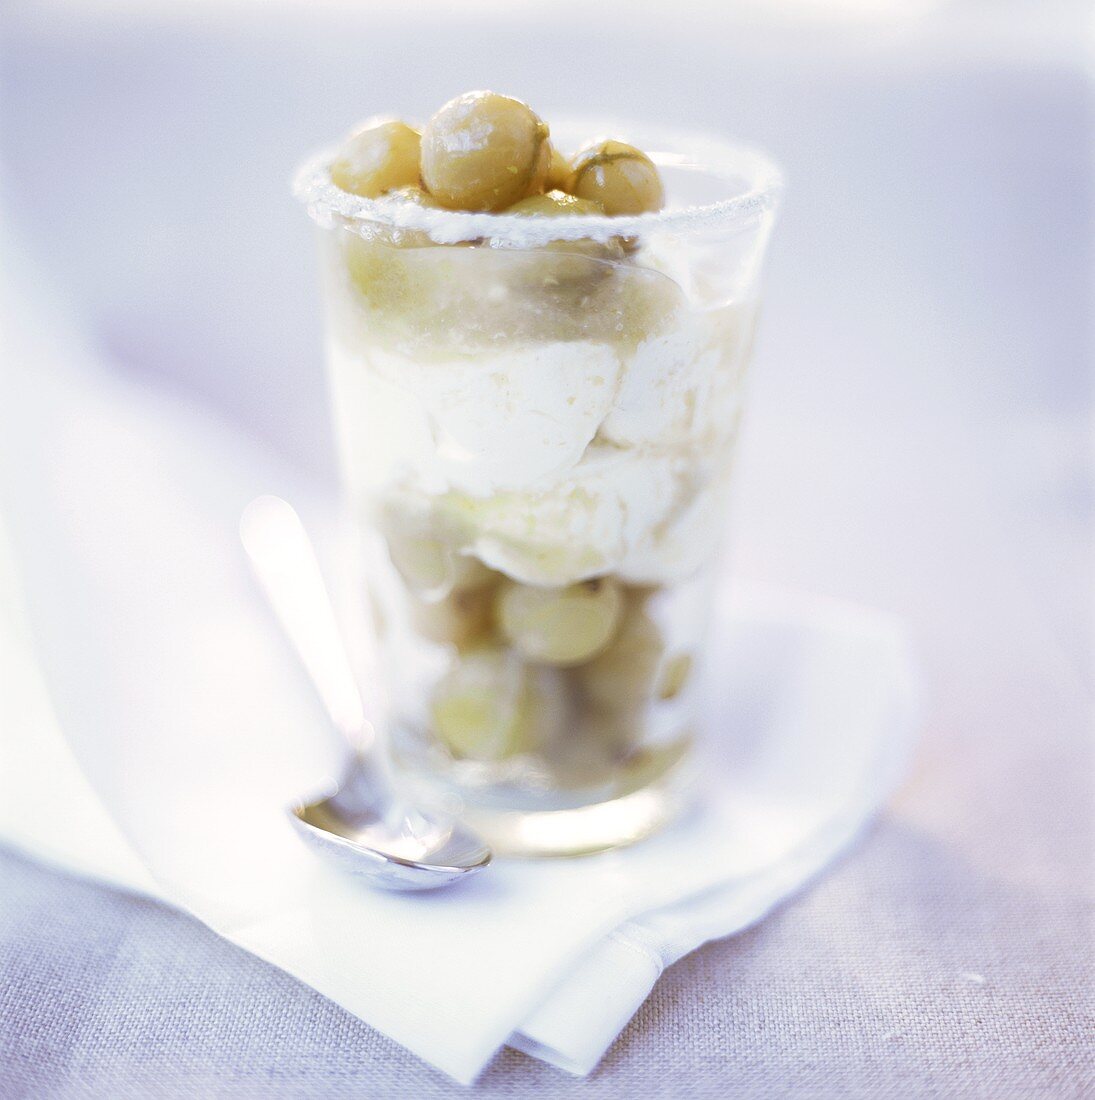 Layered sundae with yoghurt ice cream and gooseberry compote